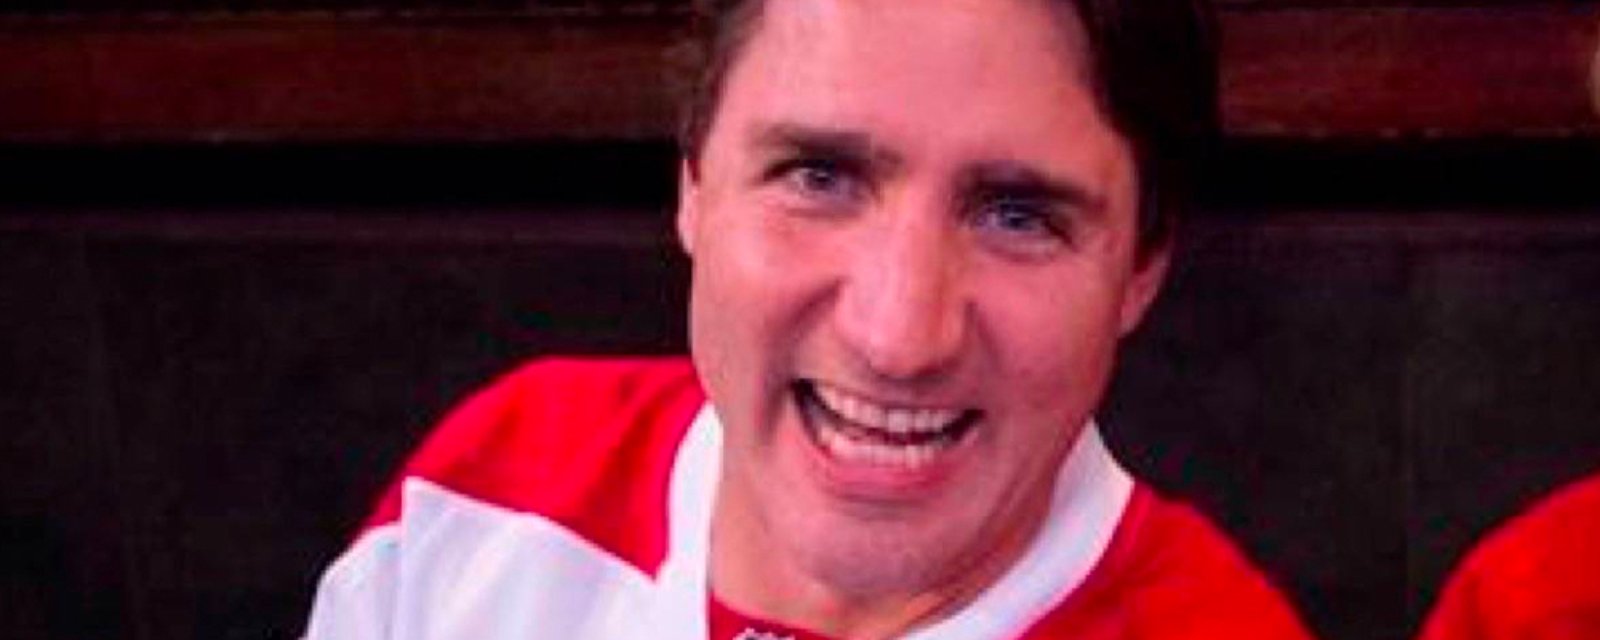 Justin Trudeau takes a lighthearted shot at the Leafs and their fanbase